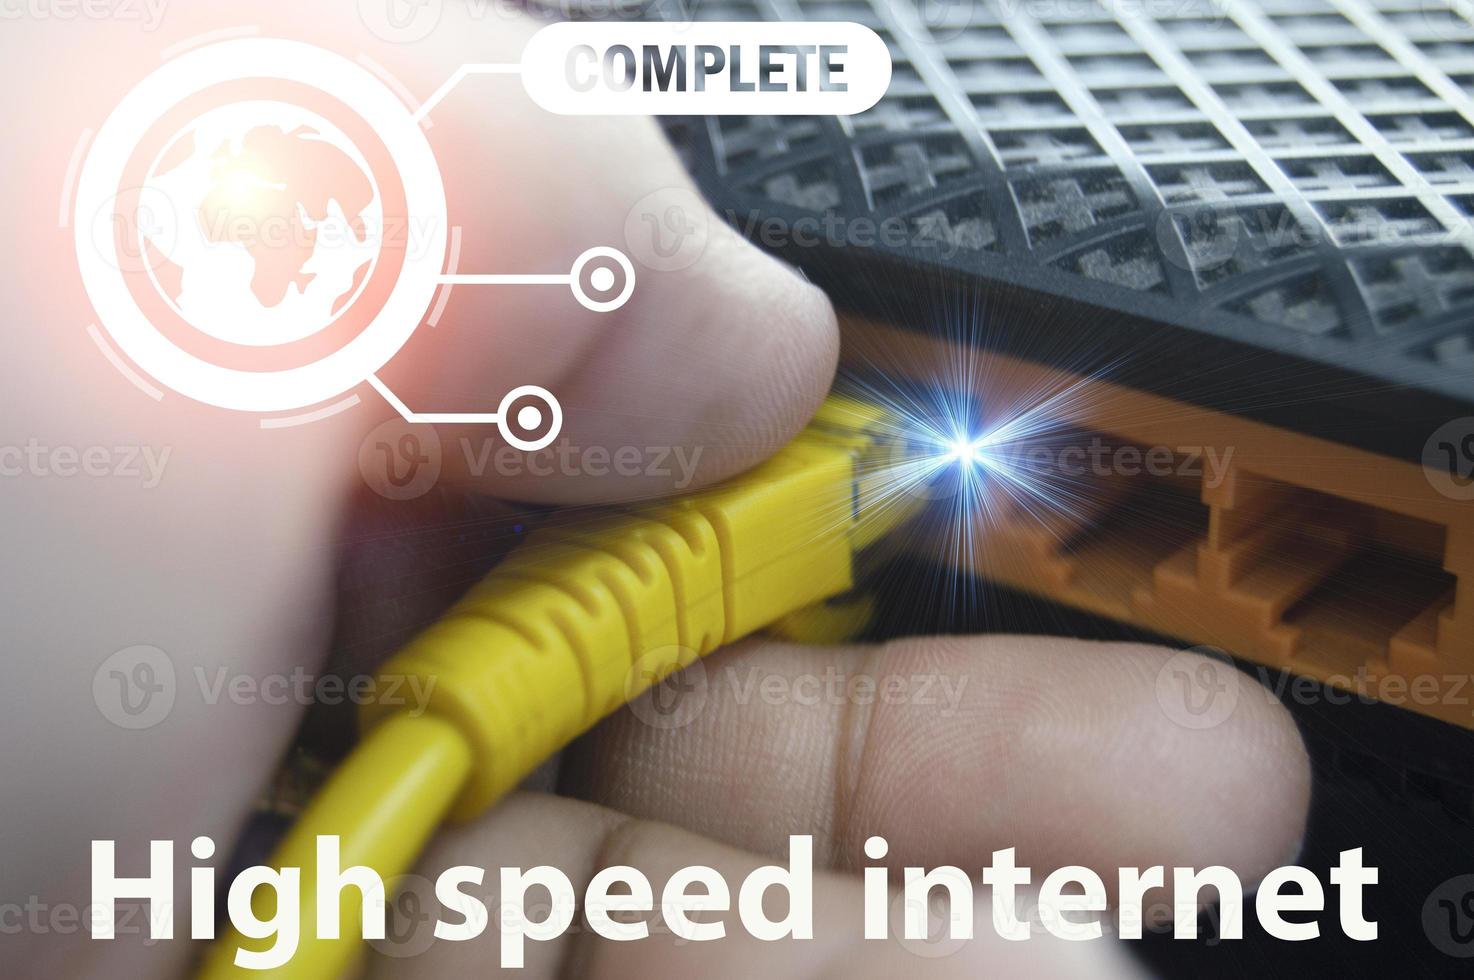 The concept of high speed internet connection is popular all over the world. photo